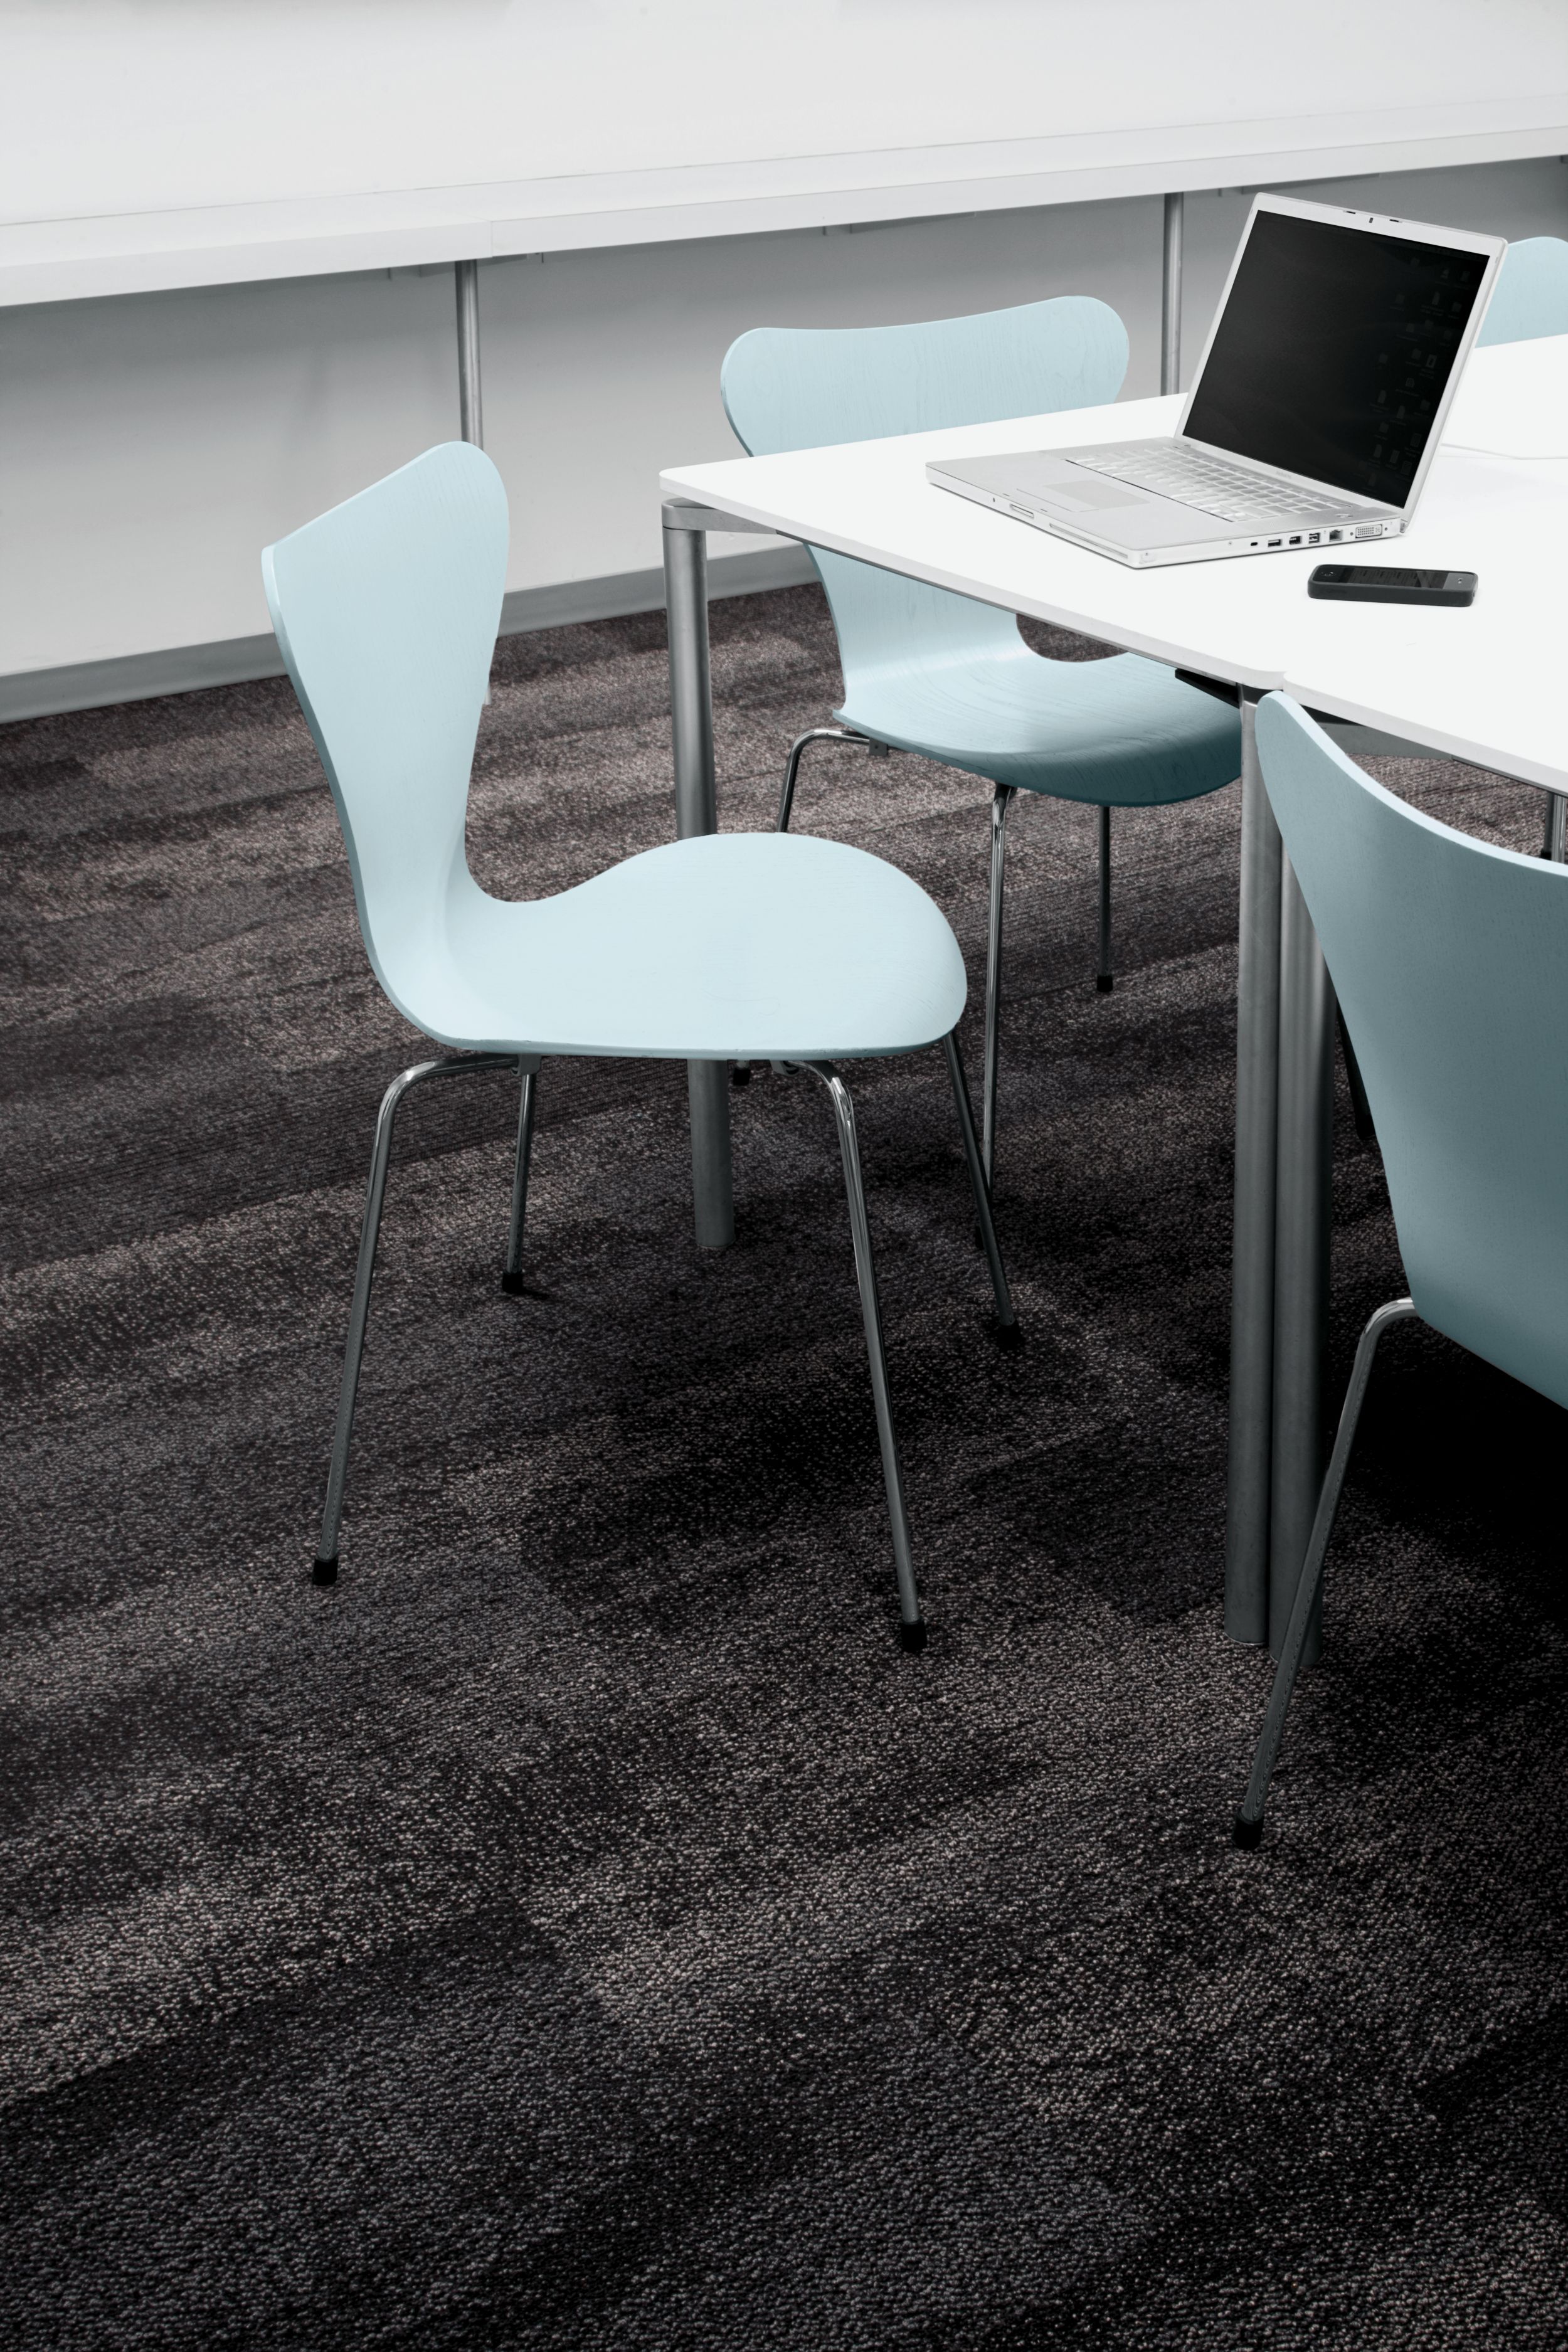 Interface Neighborhood Smooth plank carpet tile in meeting room or classroom with laptop and light blue chairs numéro d’image 5